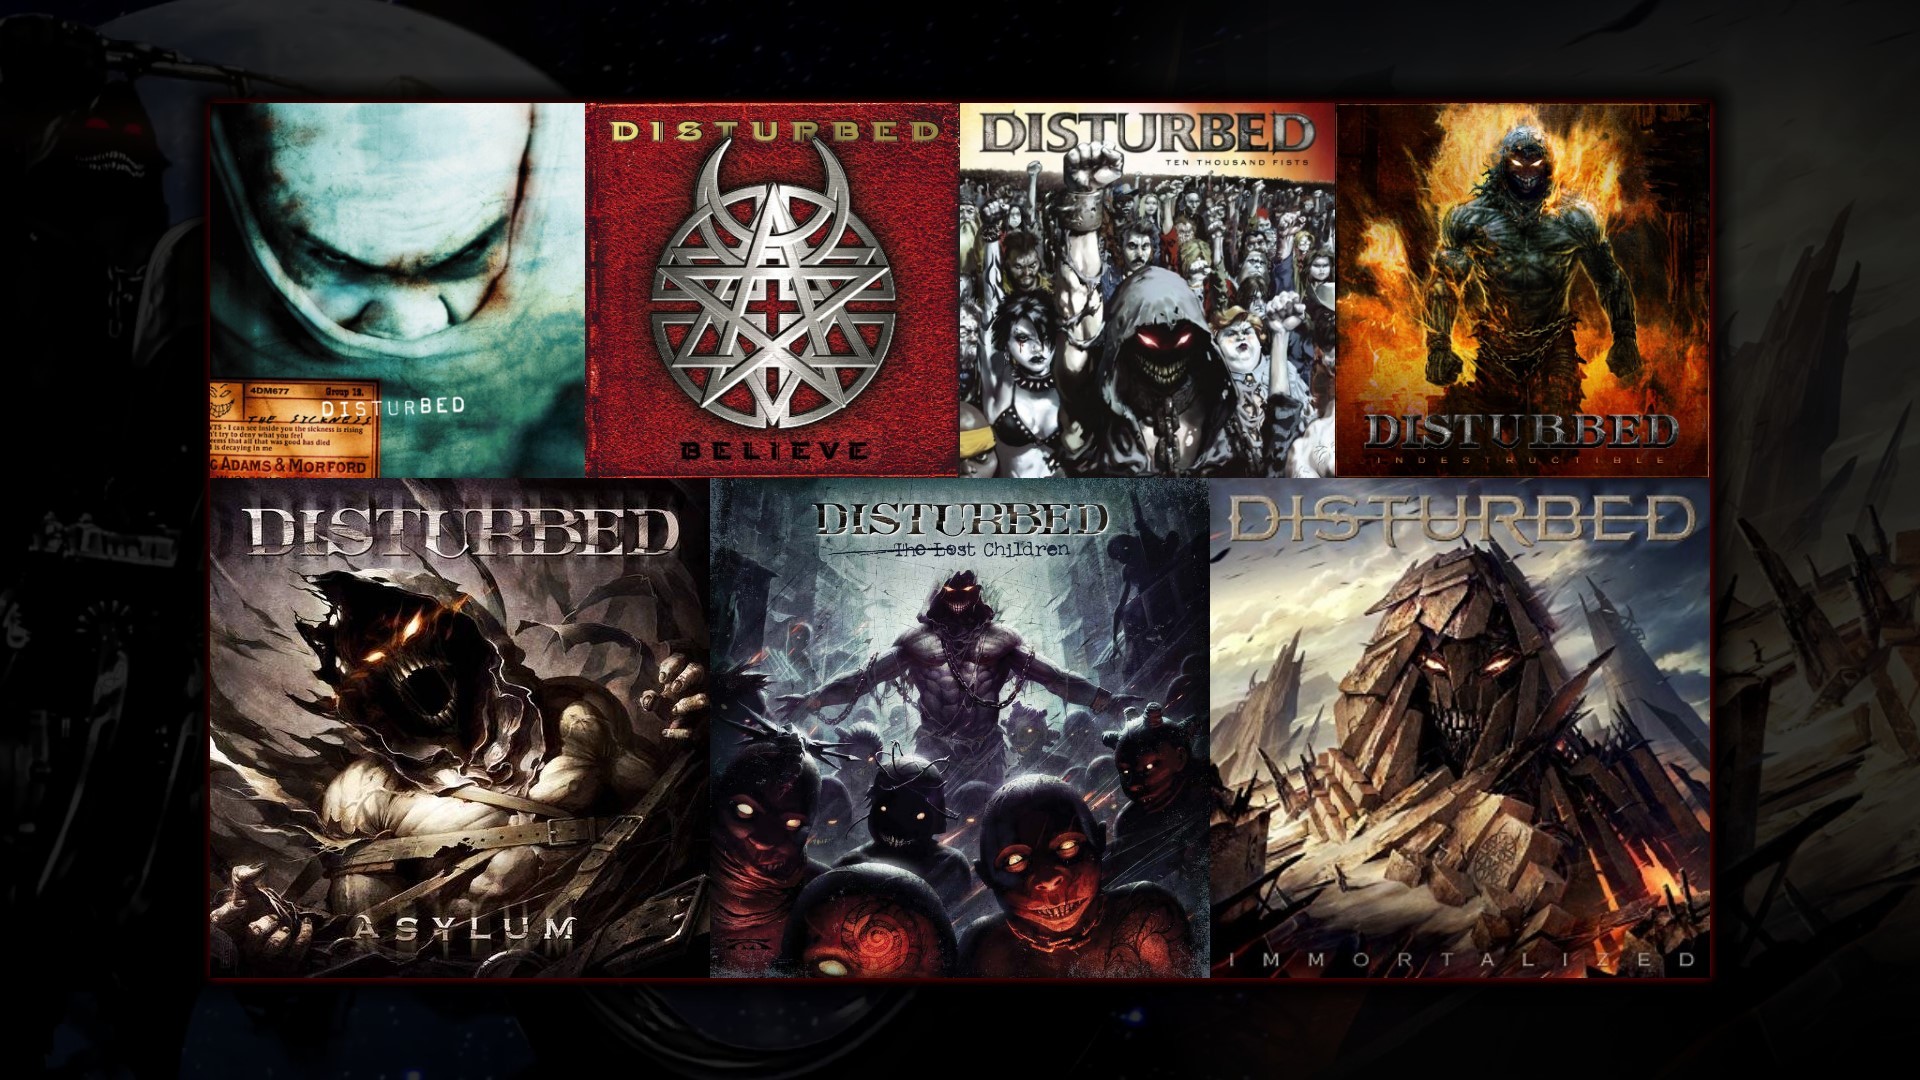 1920x1080 I just made this Disturbed discography wallpaper, thought I'd share  [] ...